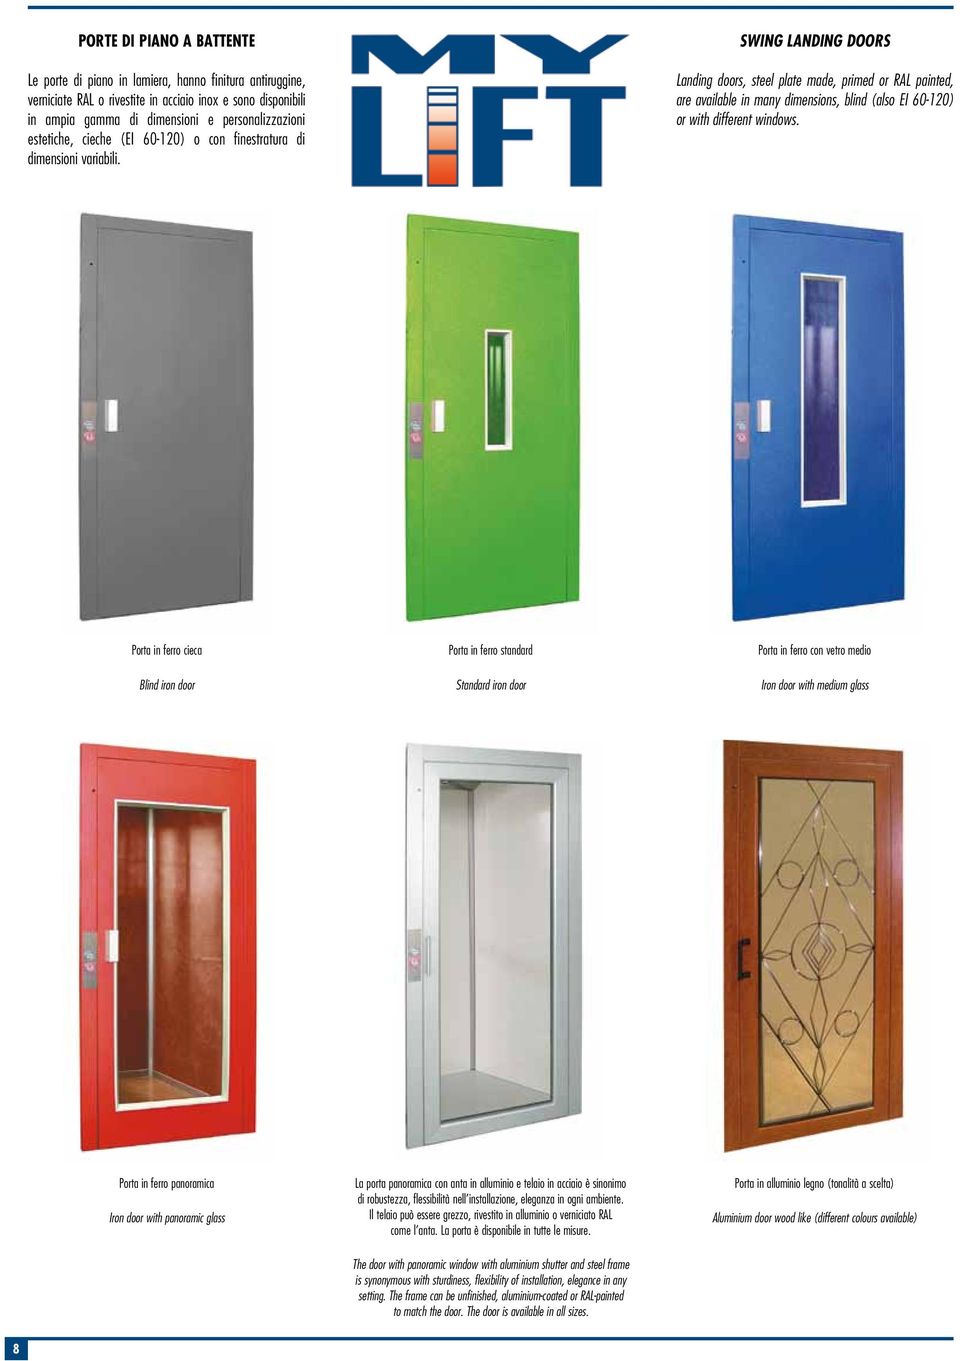 swing landing doors Landing doors, steel plate made, primed or RAL painted, are available in many dimensions, blind (also EI 60-120) or with different windows.